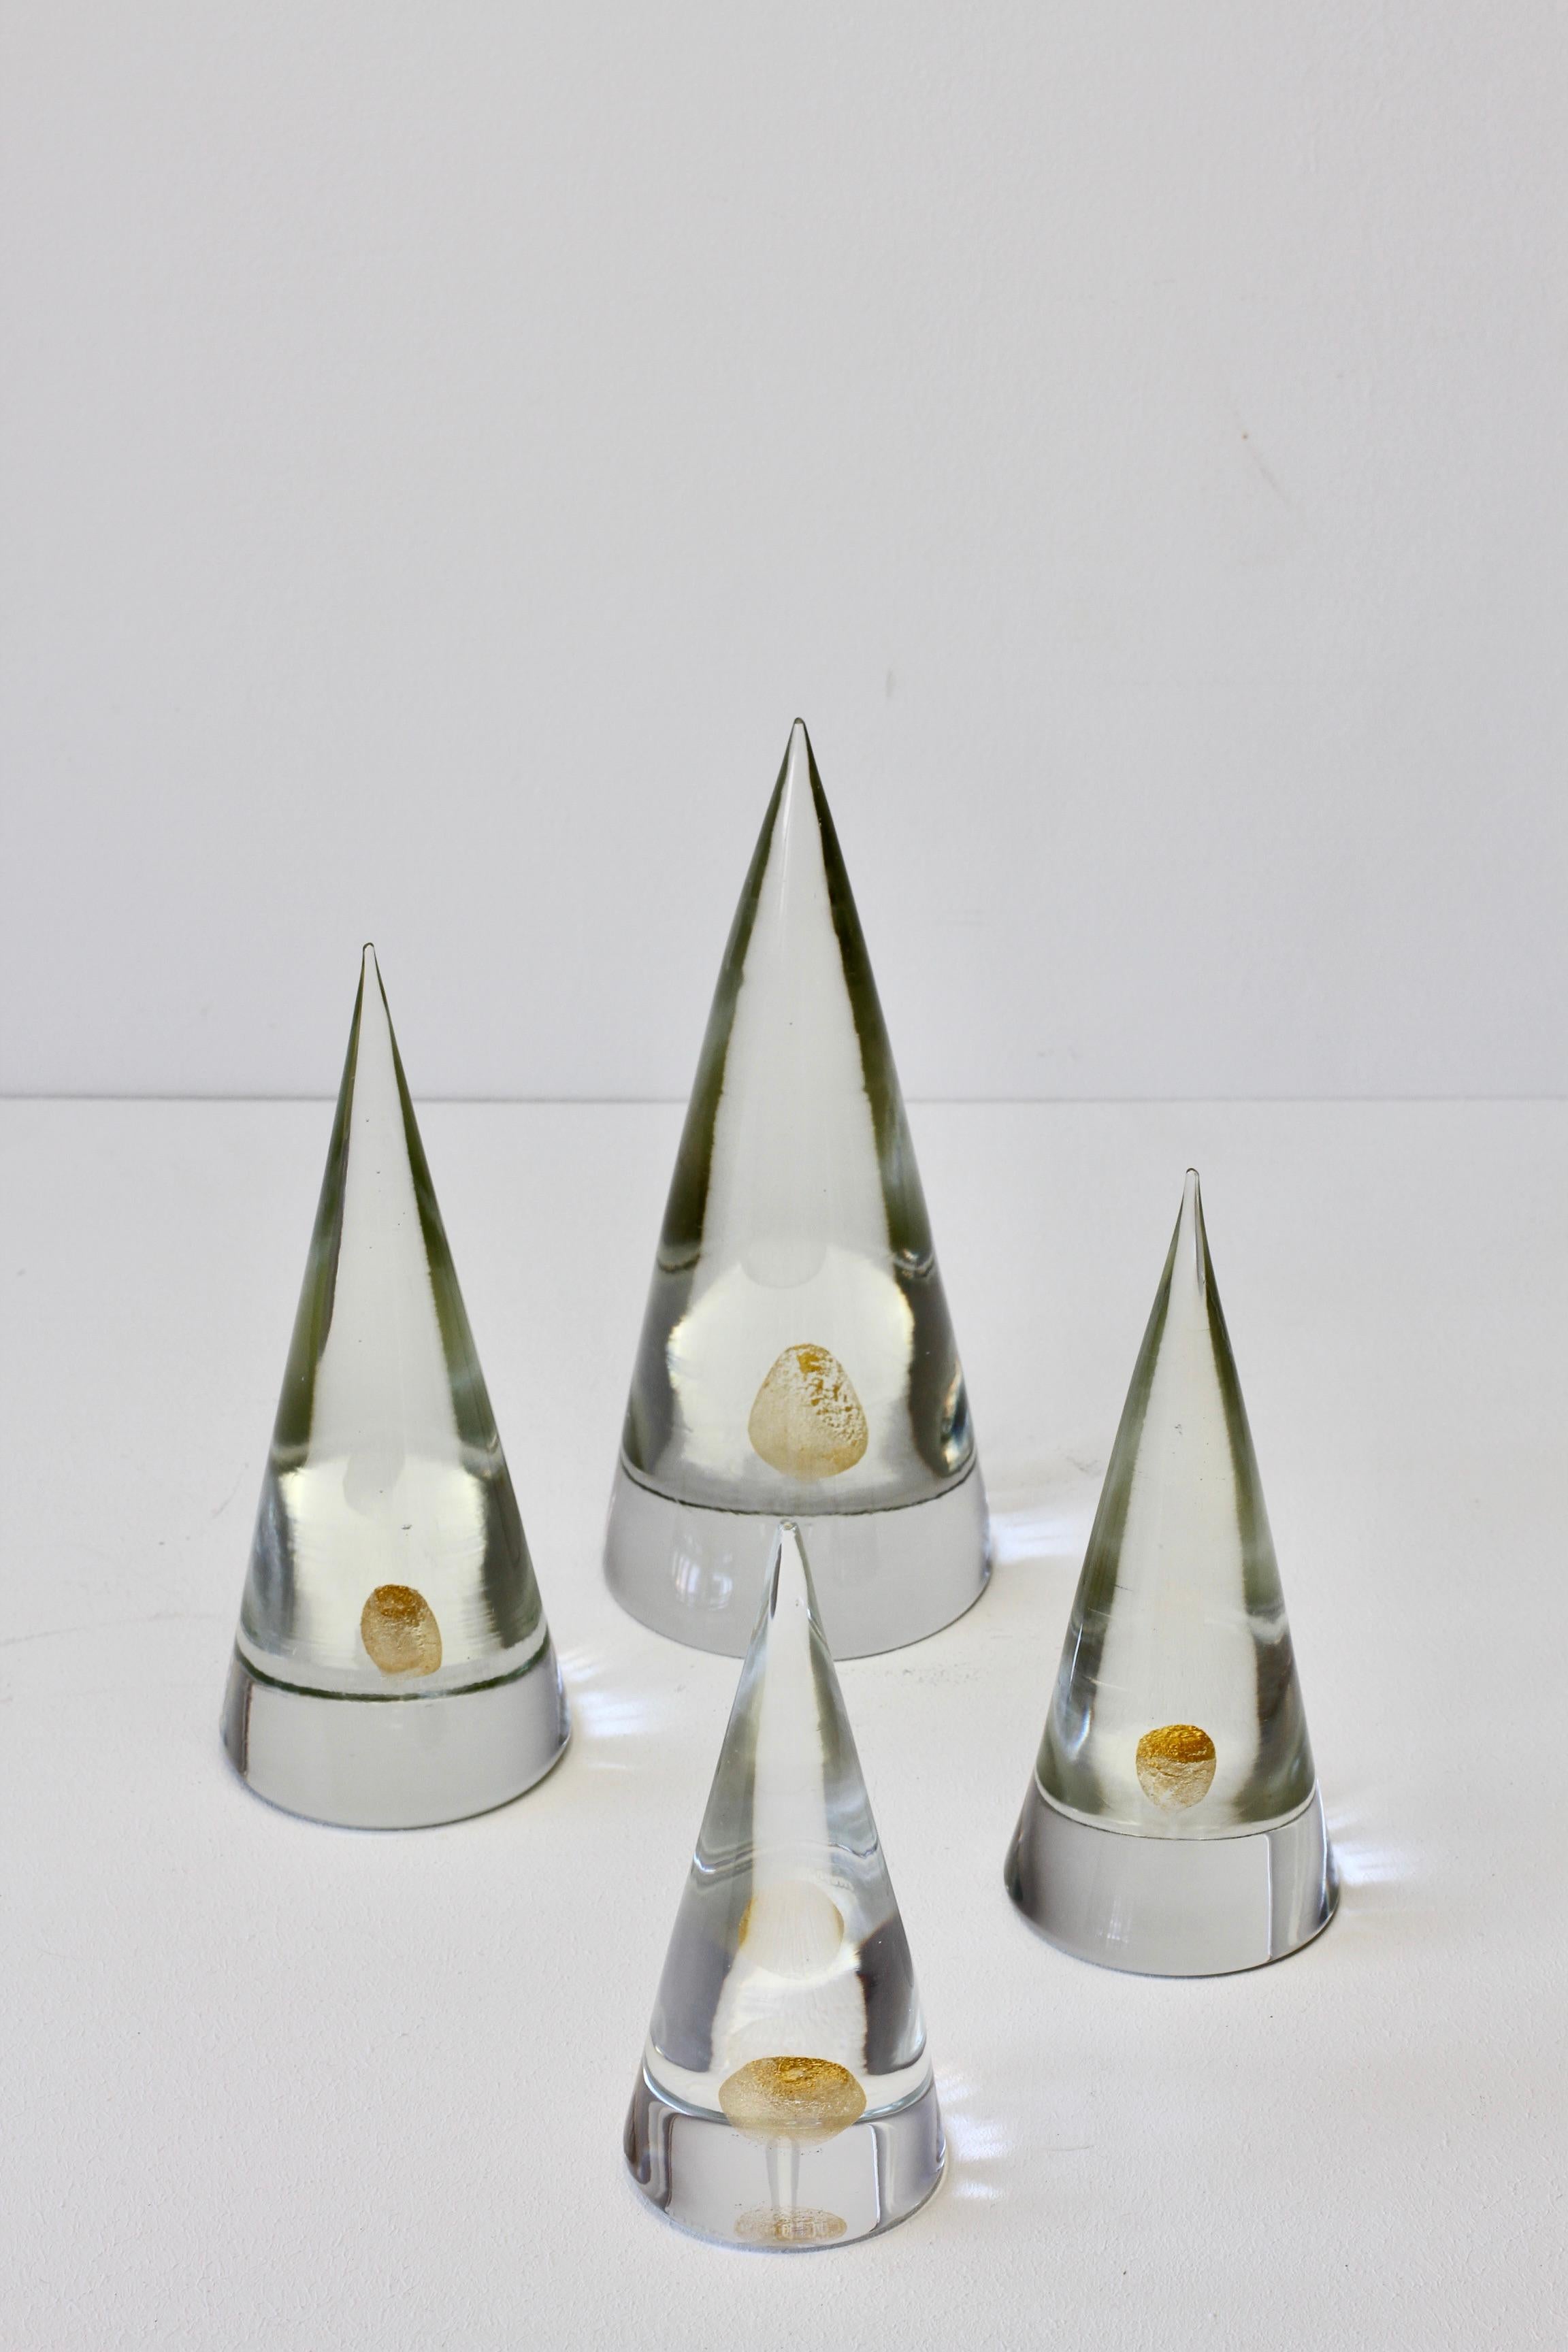 Rare signed set of four cone shaped obelisk paperweights with gold dust inclusions attributed to Antonio da Ros for Cenedese, circa 1960-1970.

Dimensions: 
1 - 23.5cm tall by 10cm diameter
2 - 21.4cm tall by 8.5cm